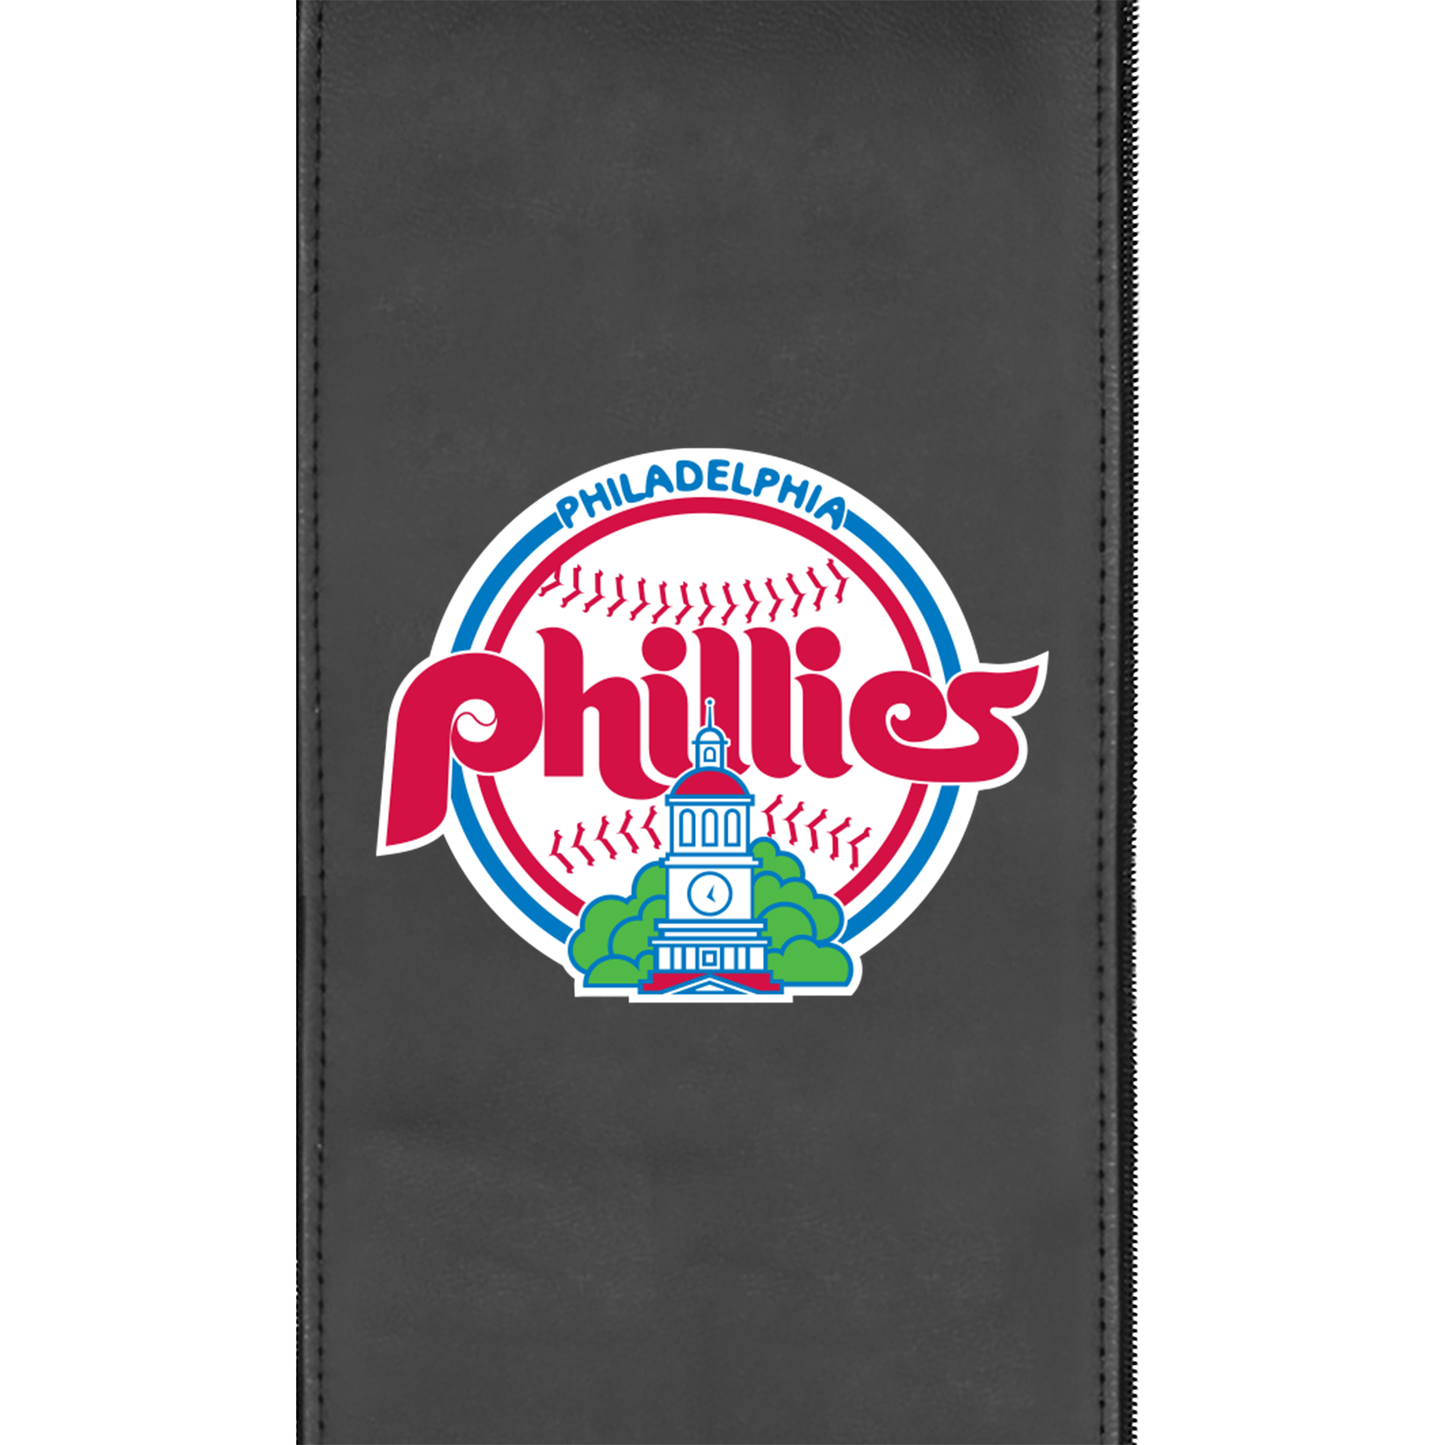 Relax Home Theater Recliner with Philadelphia Phillies Cooperstown Primary